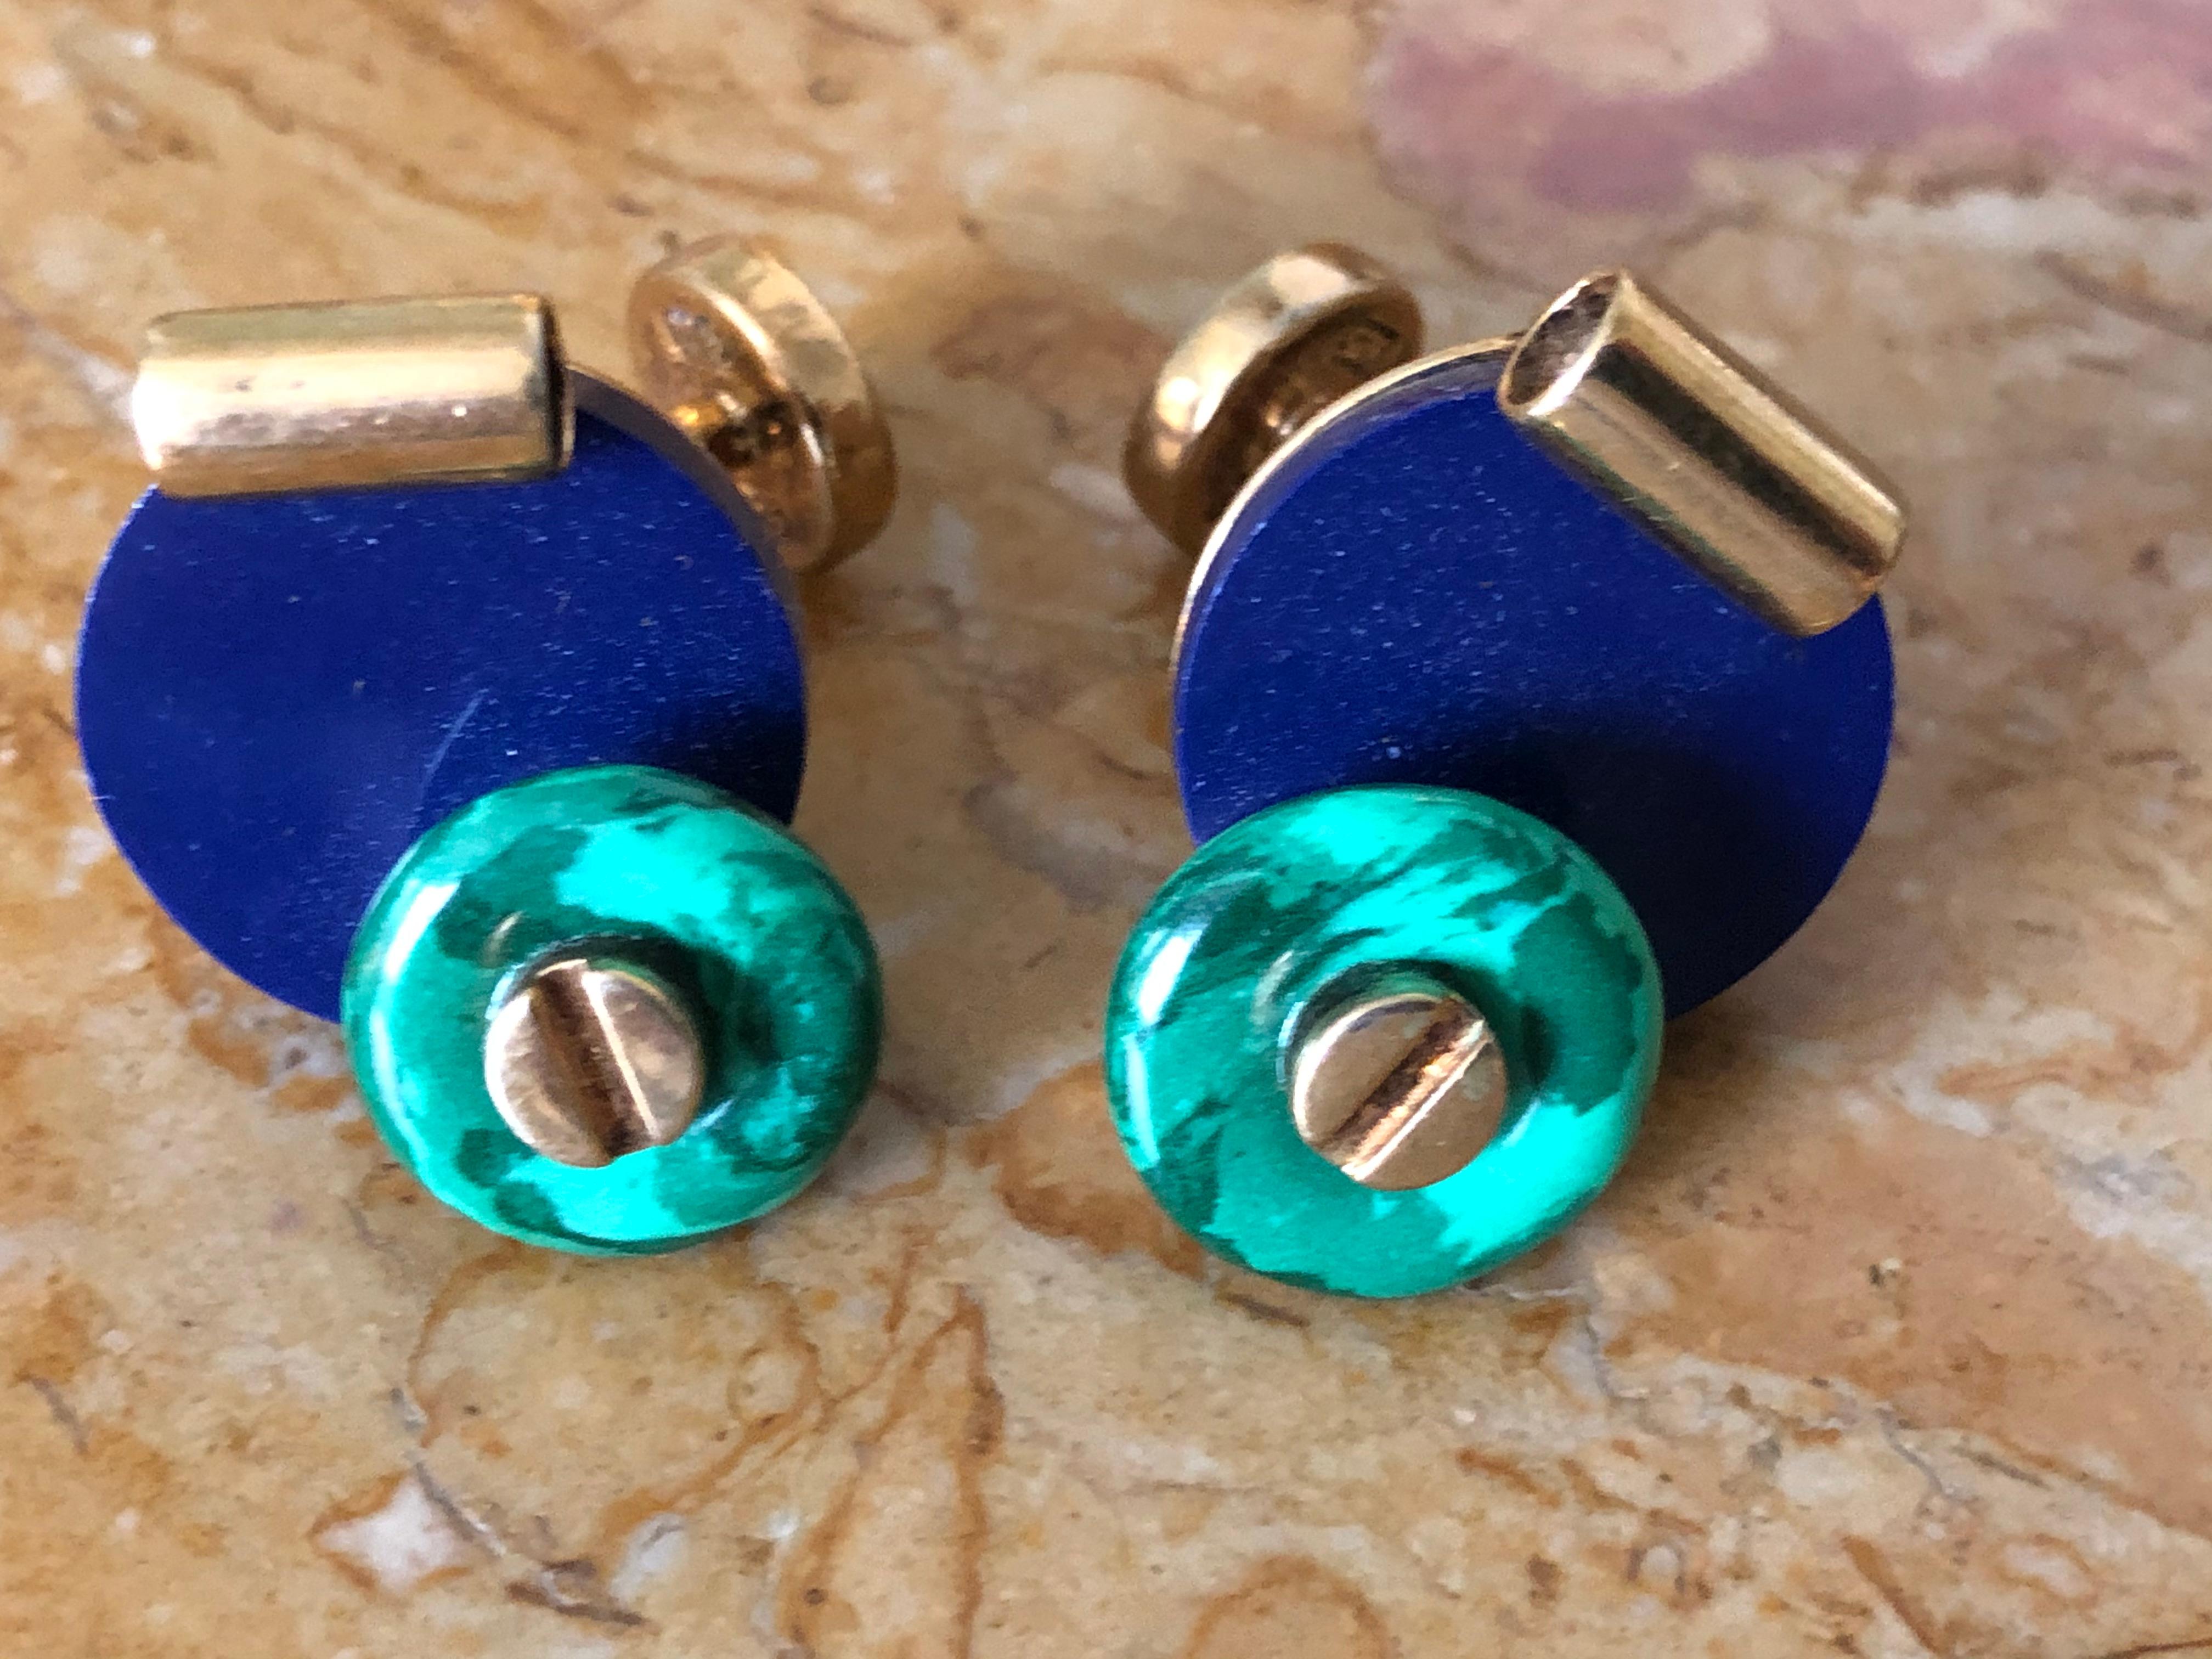 Marc Jacobs Vintage Brutalist Vermeil Malachite and Lapis Cufflinks.
Gold plated Sterling Silver with malachite and lapis lazuli.
The front of the cufflink is 1